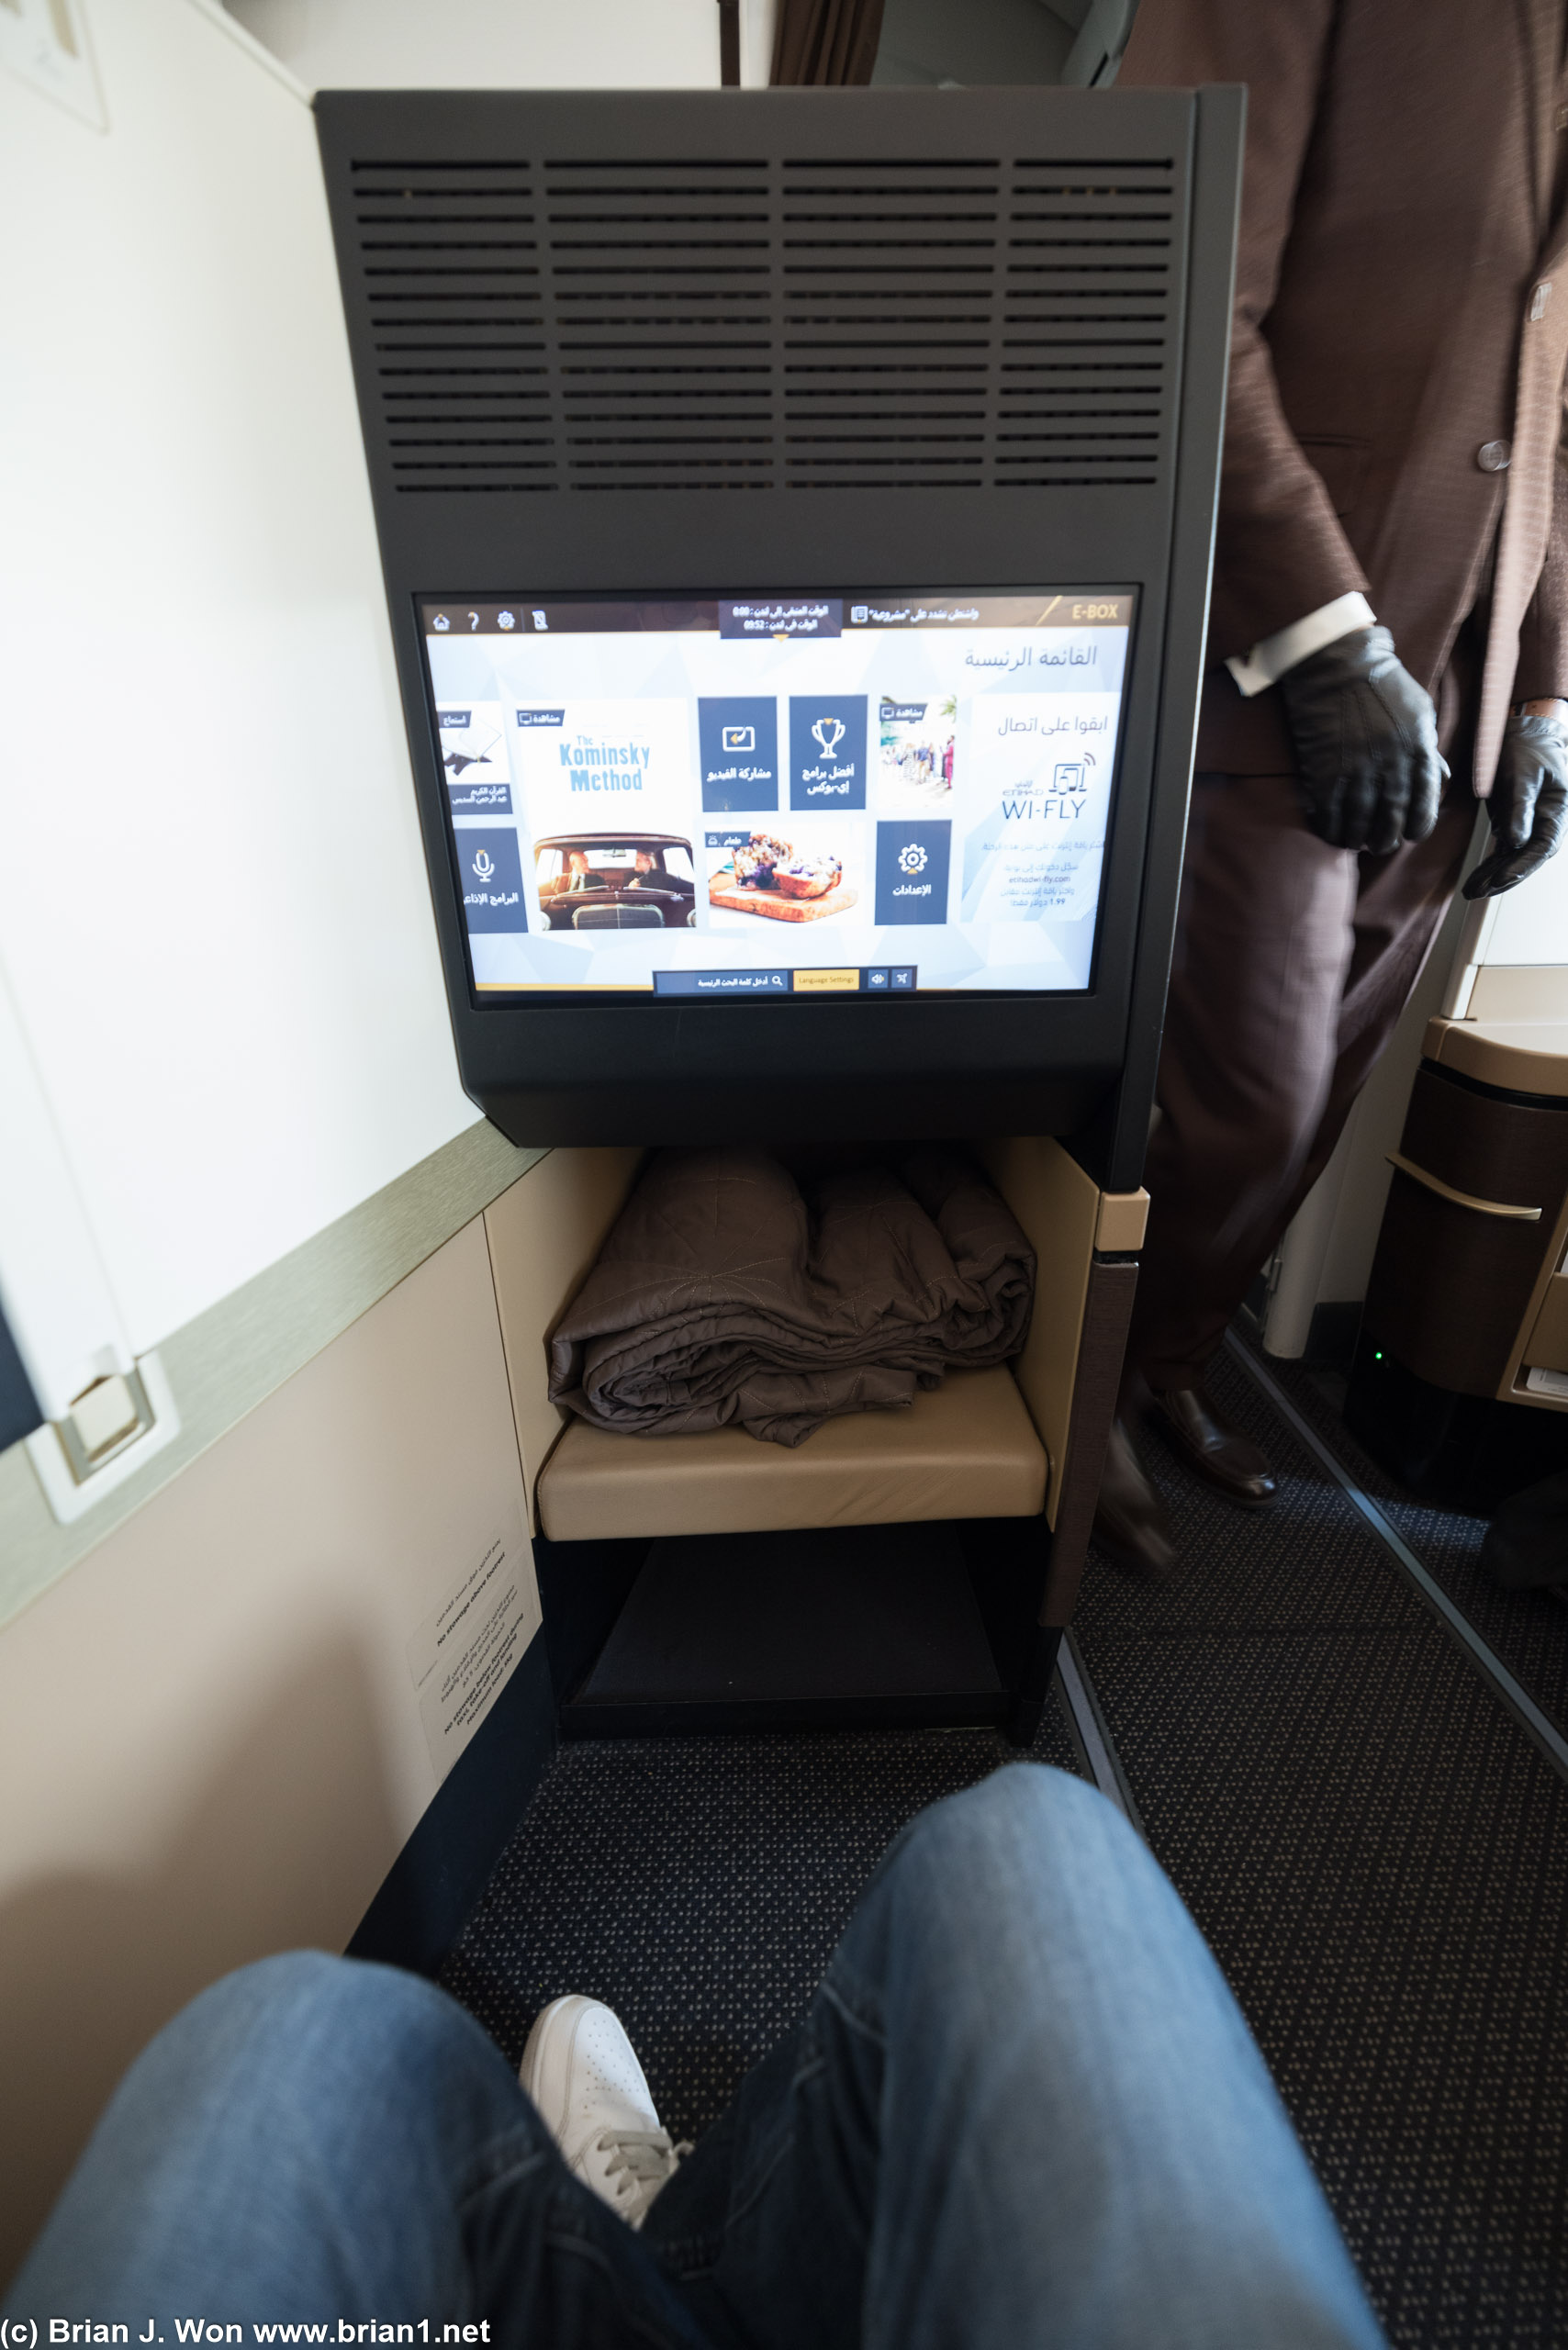 More cramped and exposed to the aisle than expected for such a modern business class product.